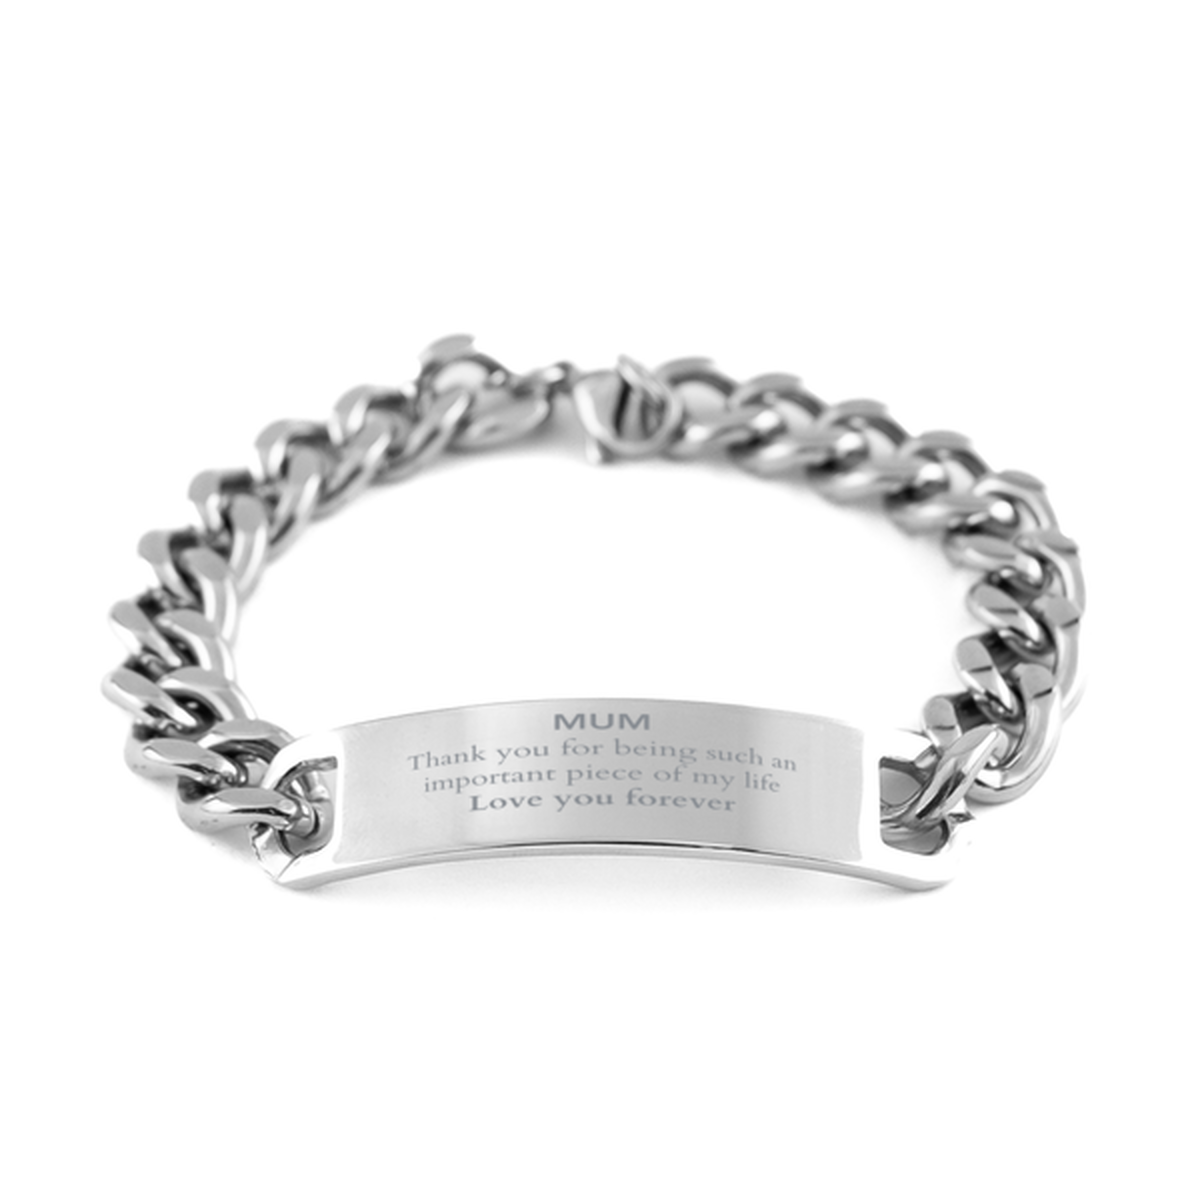 Appropriate Mum Cuban Chain Stainless Steel Bracelet Epic Birthday Gifts for Mum Thank you for being such an important piece of my life Mum Christmas Mothers Fathers Day